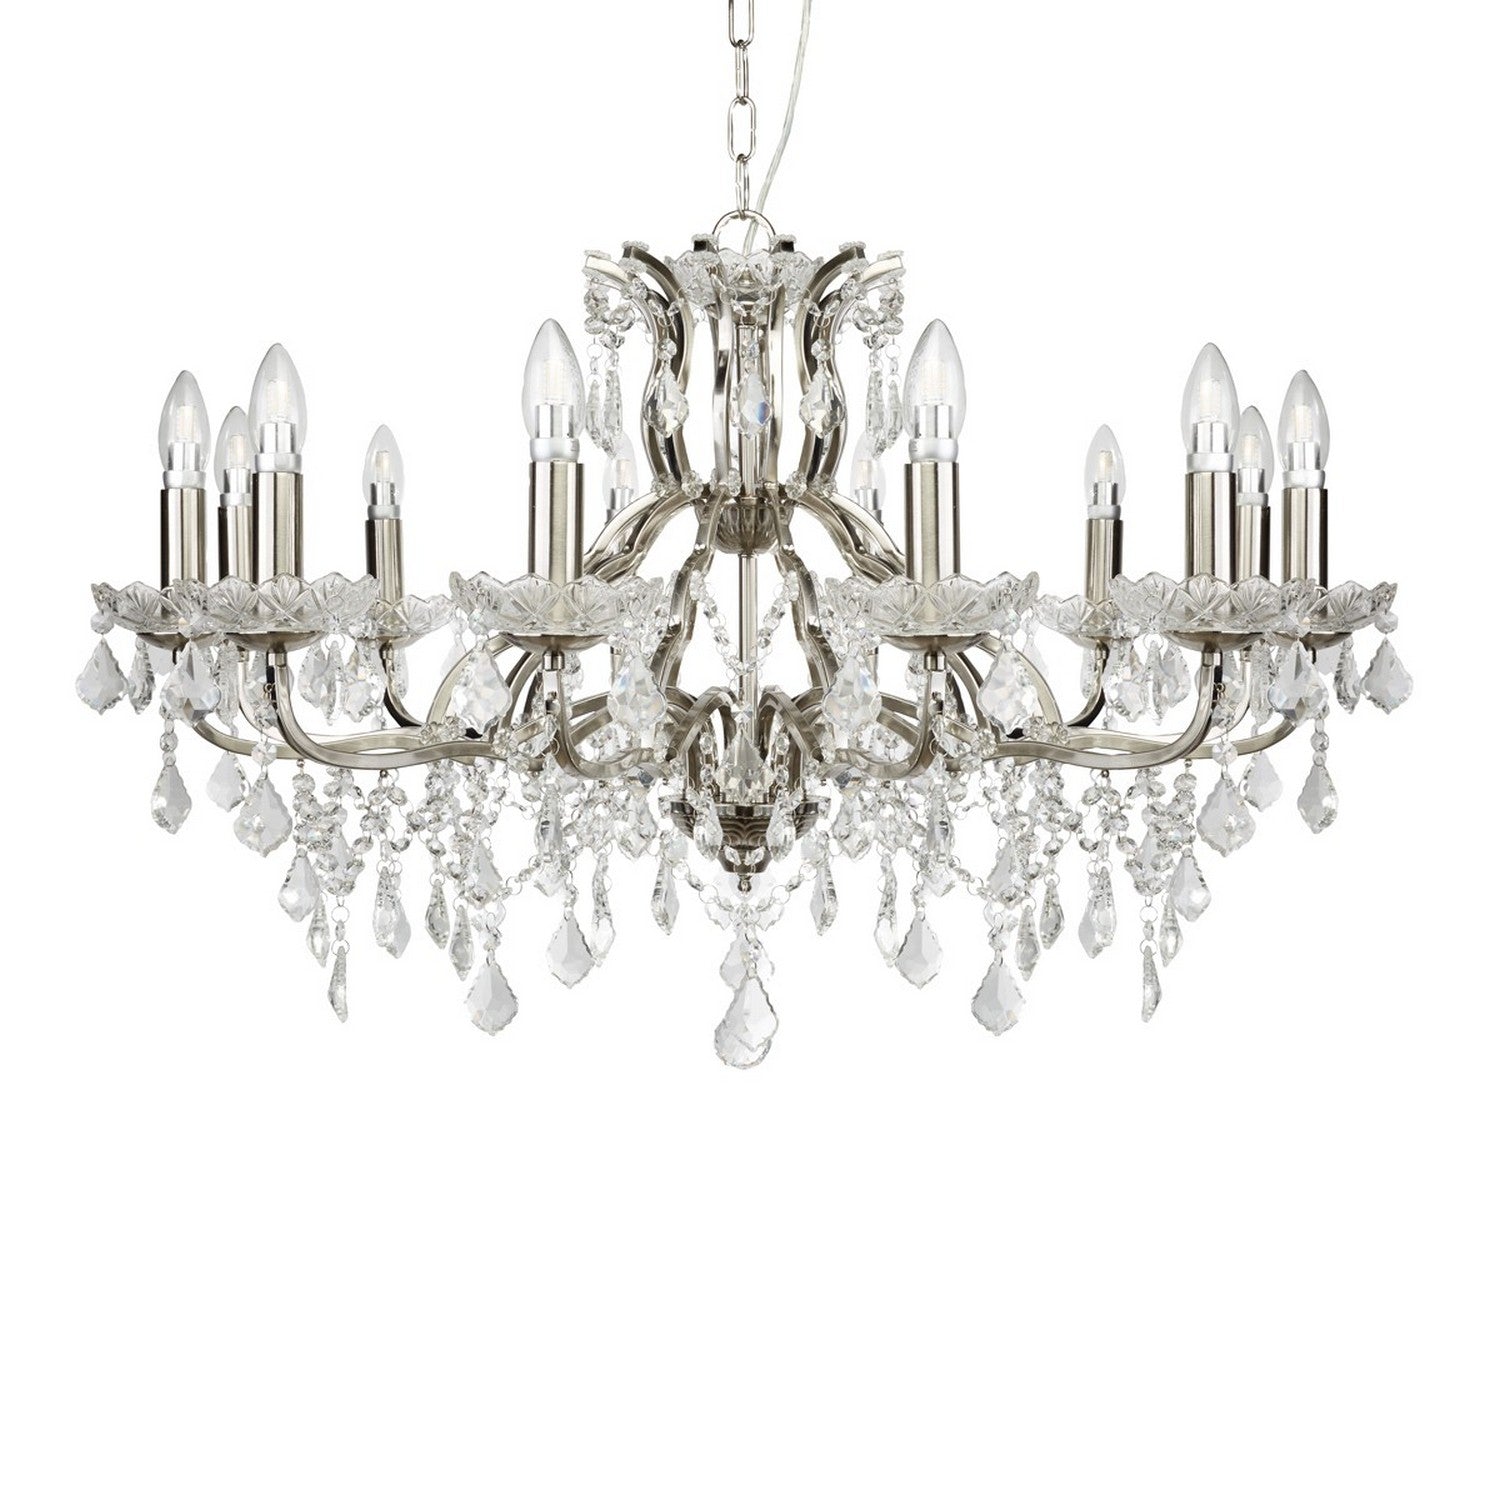 Paris 12 Lights Satin Silver Clear Crystal Drops Ceiling Chandelier